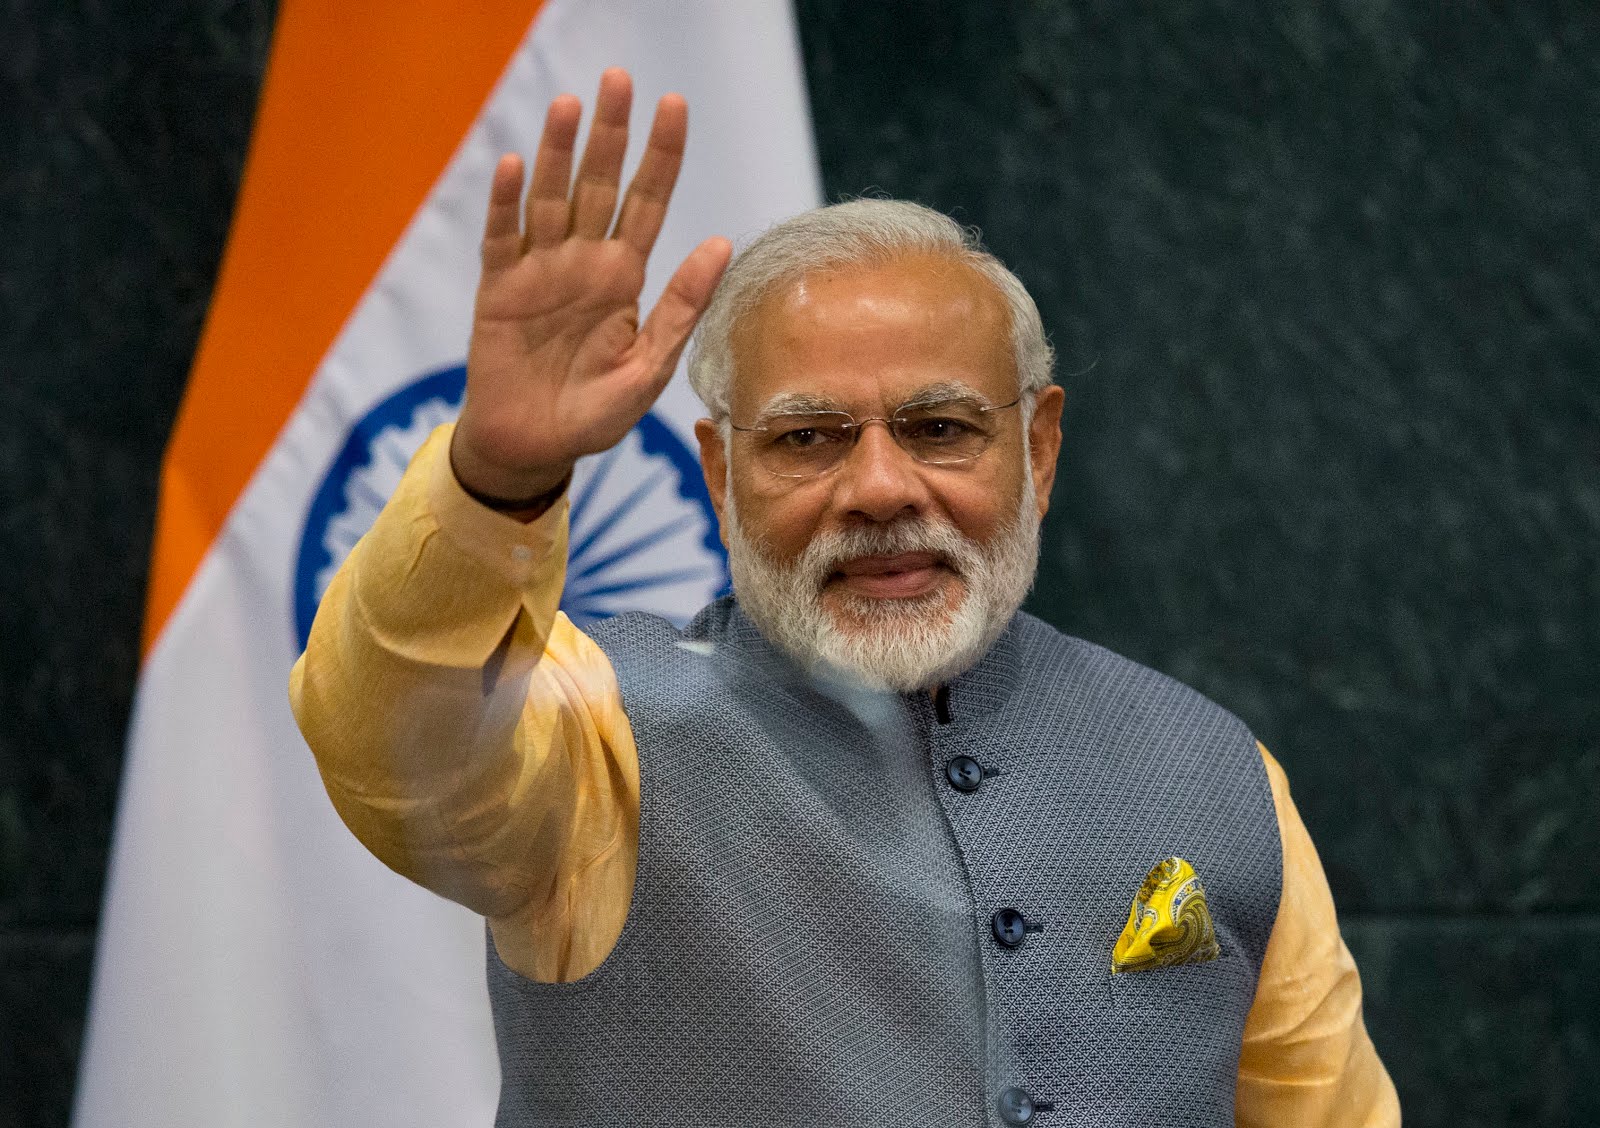 Unveiling The Leader Of The Nation: Who Is India's Prime Minister?